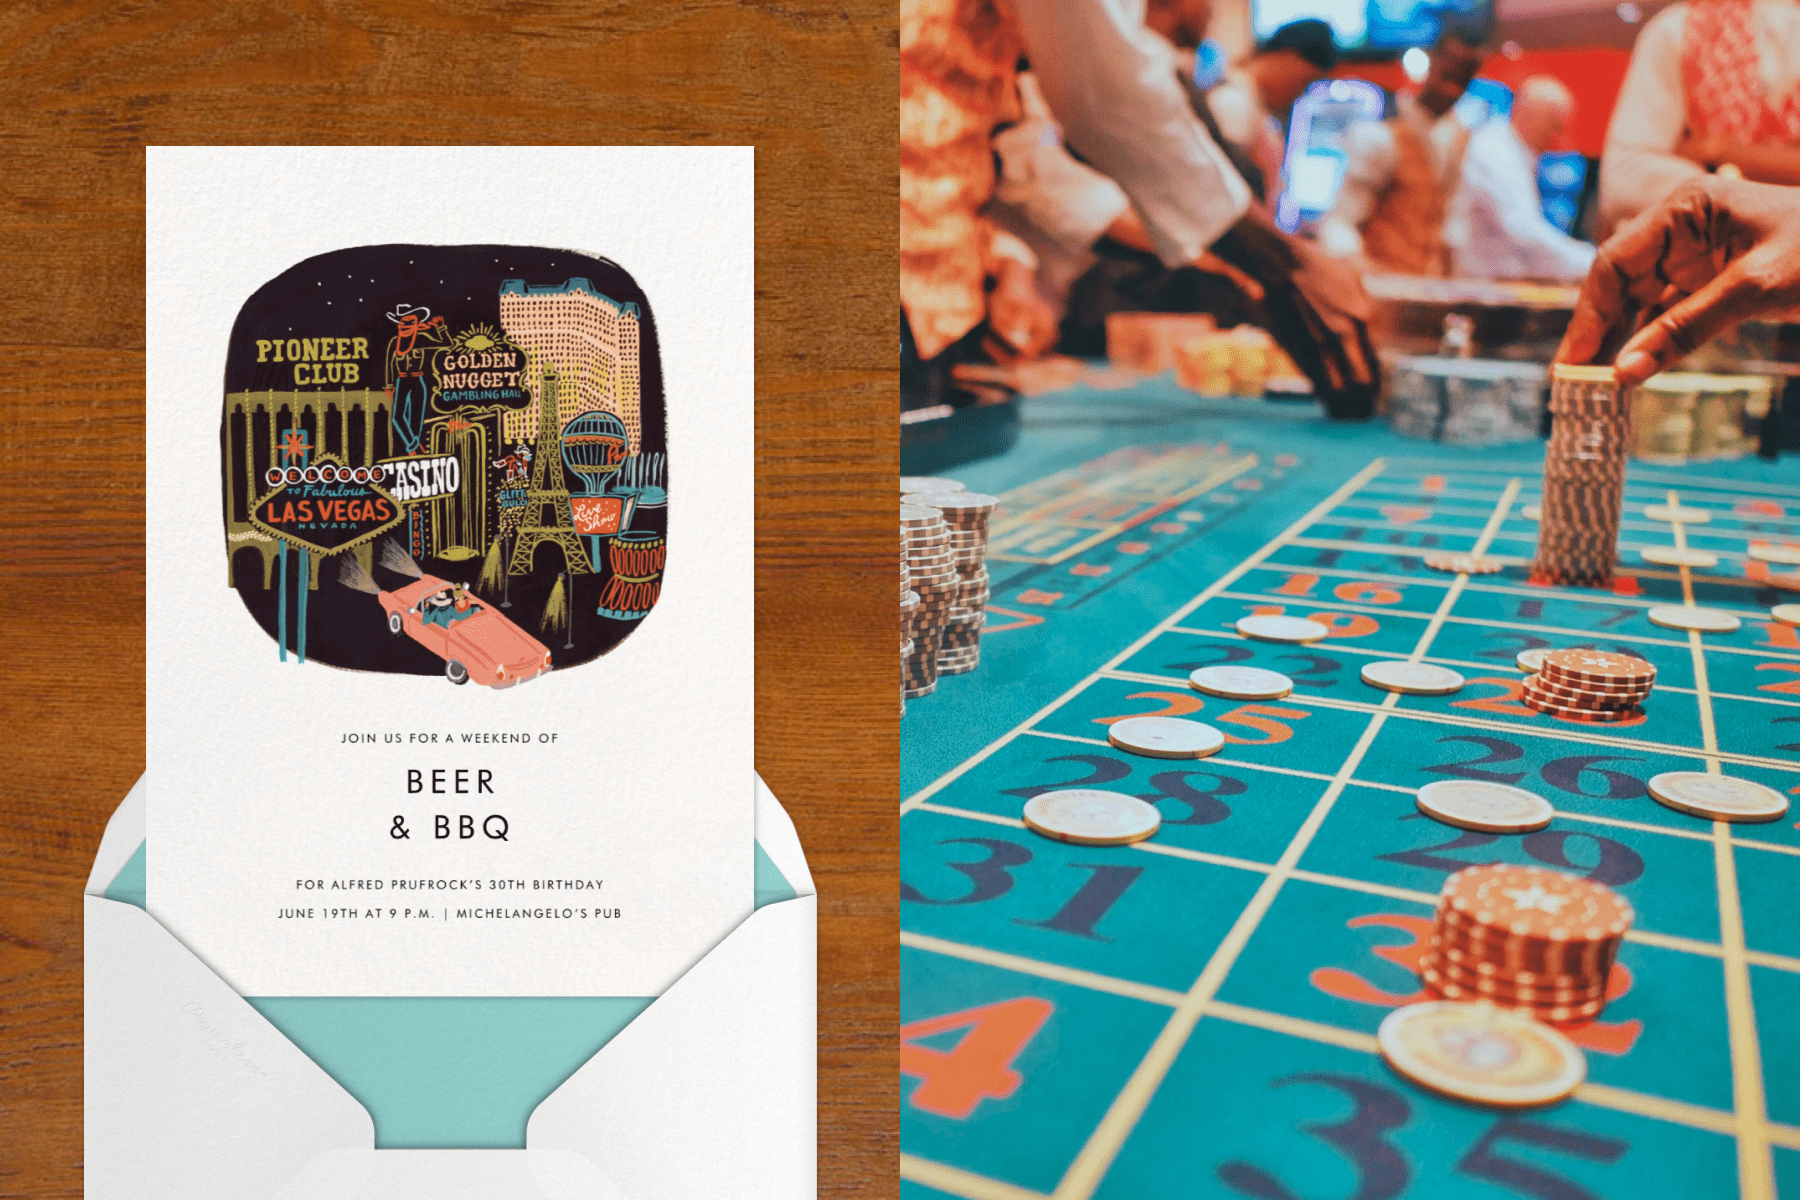 A 30th birthday invitation with an illustration of the Las Vegas strip; A Roulette table with stacks of chips.